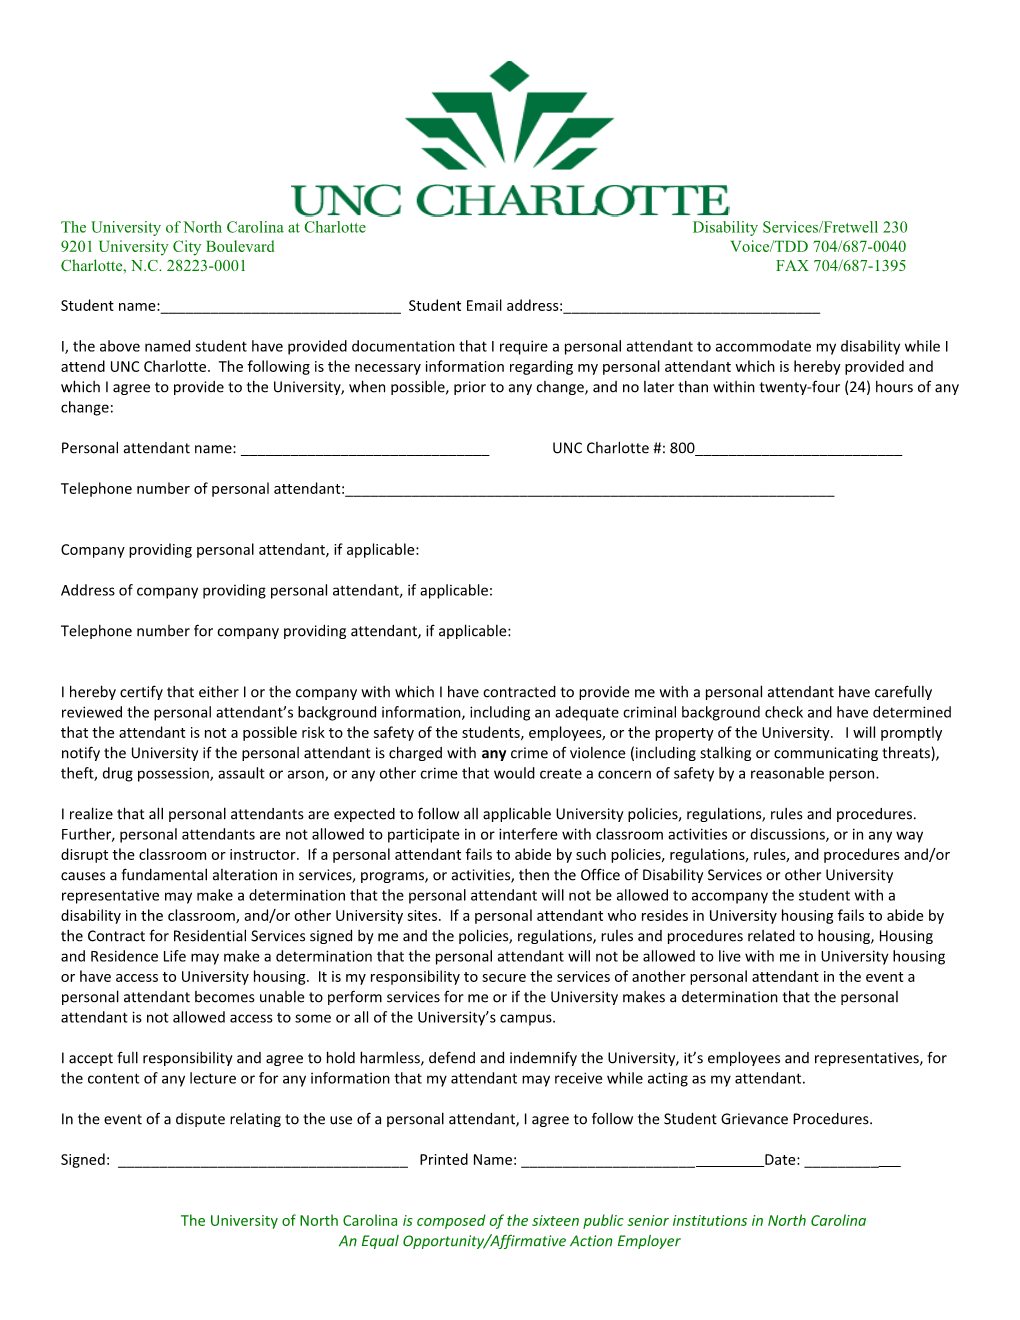 The University of North Carolina at Charlotte Disability Services/Fretwell 230